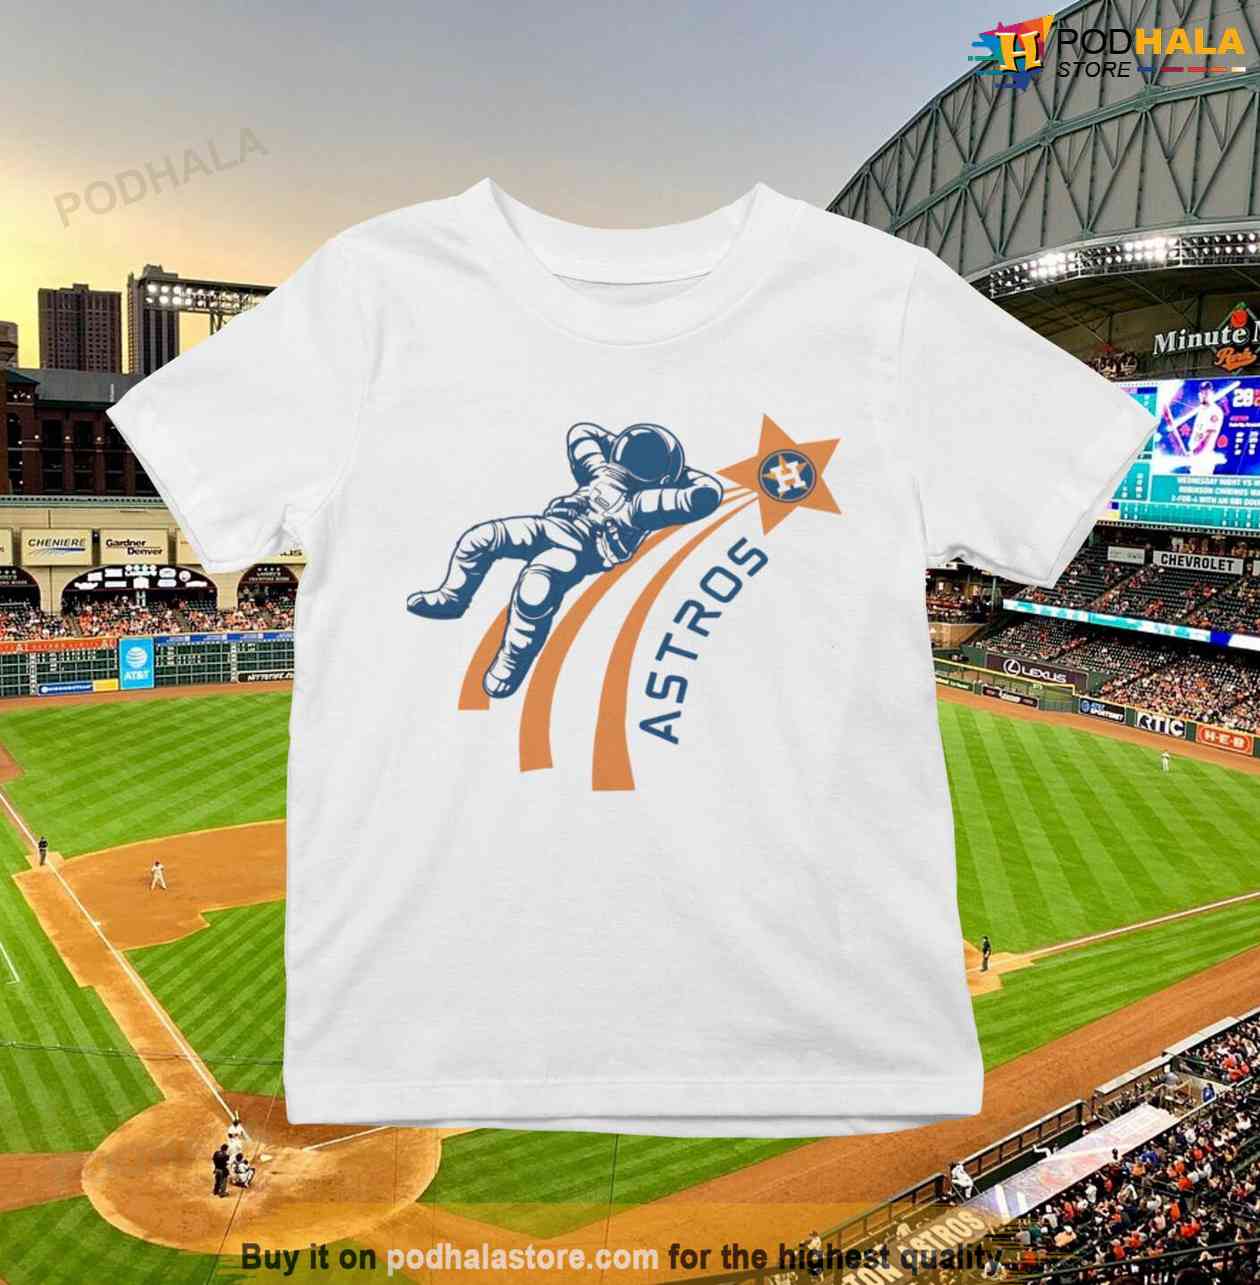 Space City Astros Jersey 